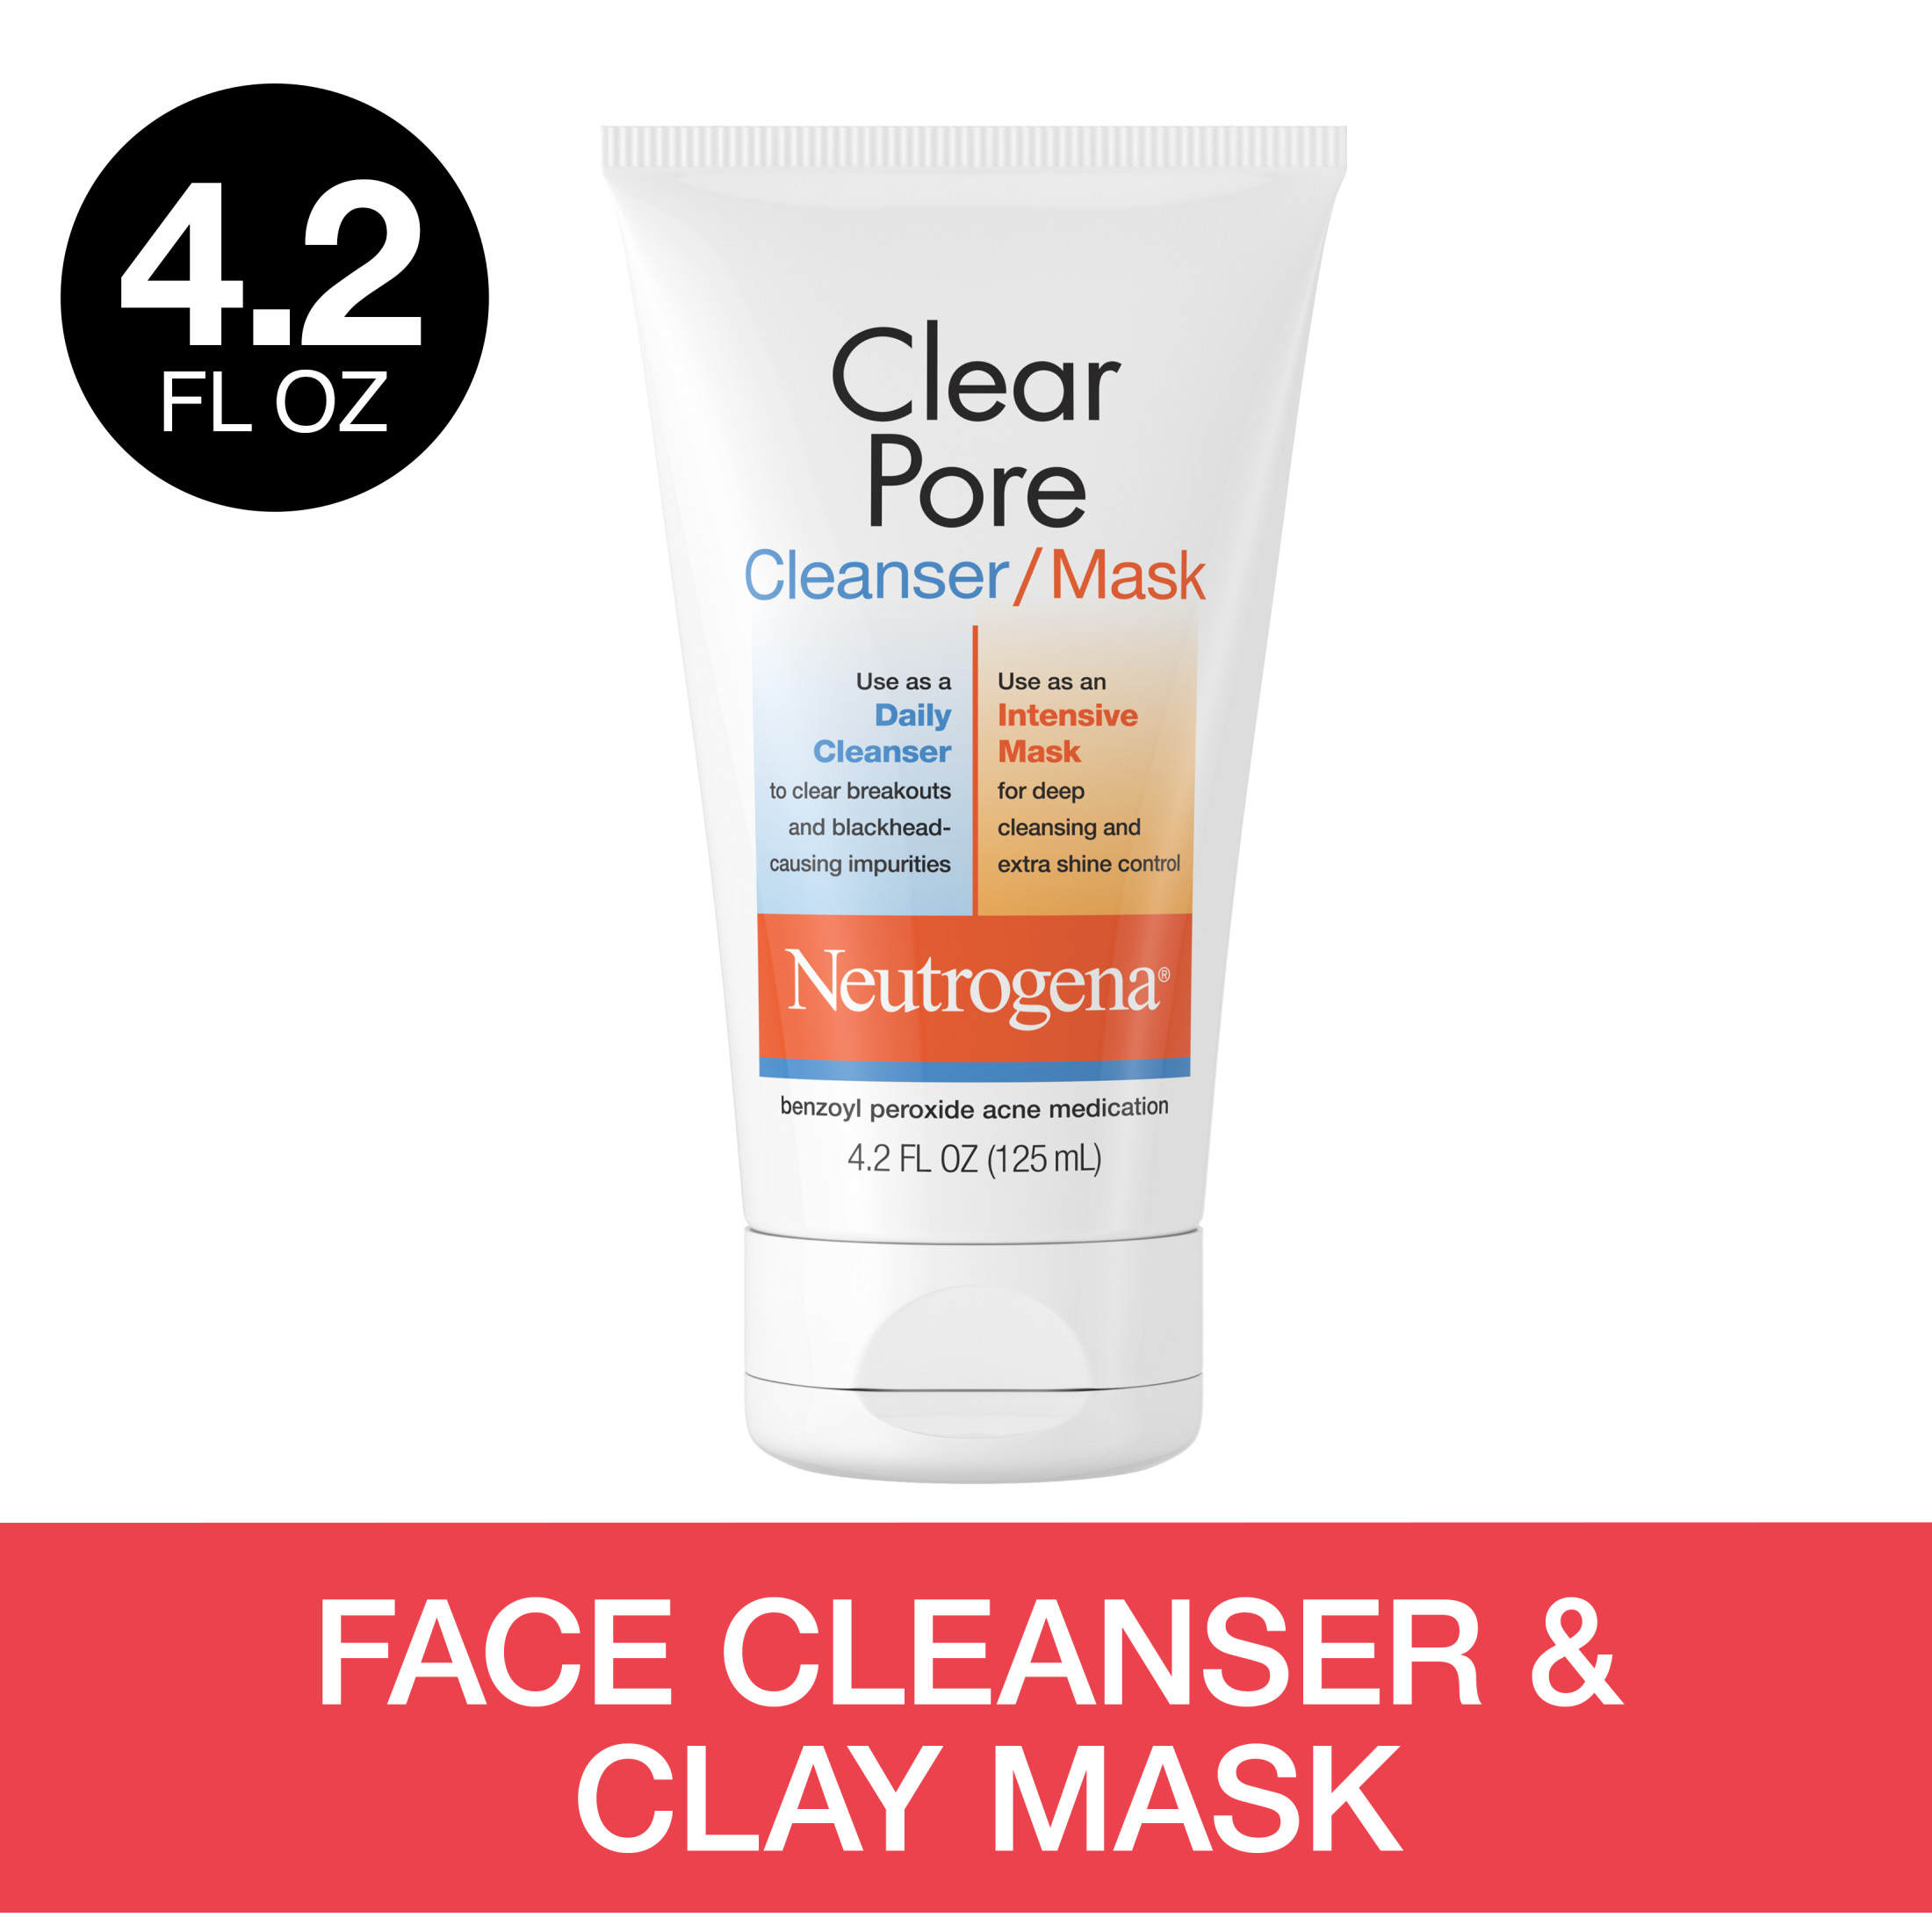 Neutrogena Clear Pore 2-in-1 Facial Cleanser & Clay Mask, 4.2 fl. oz - image 1 of 11